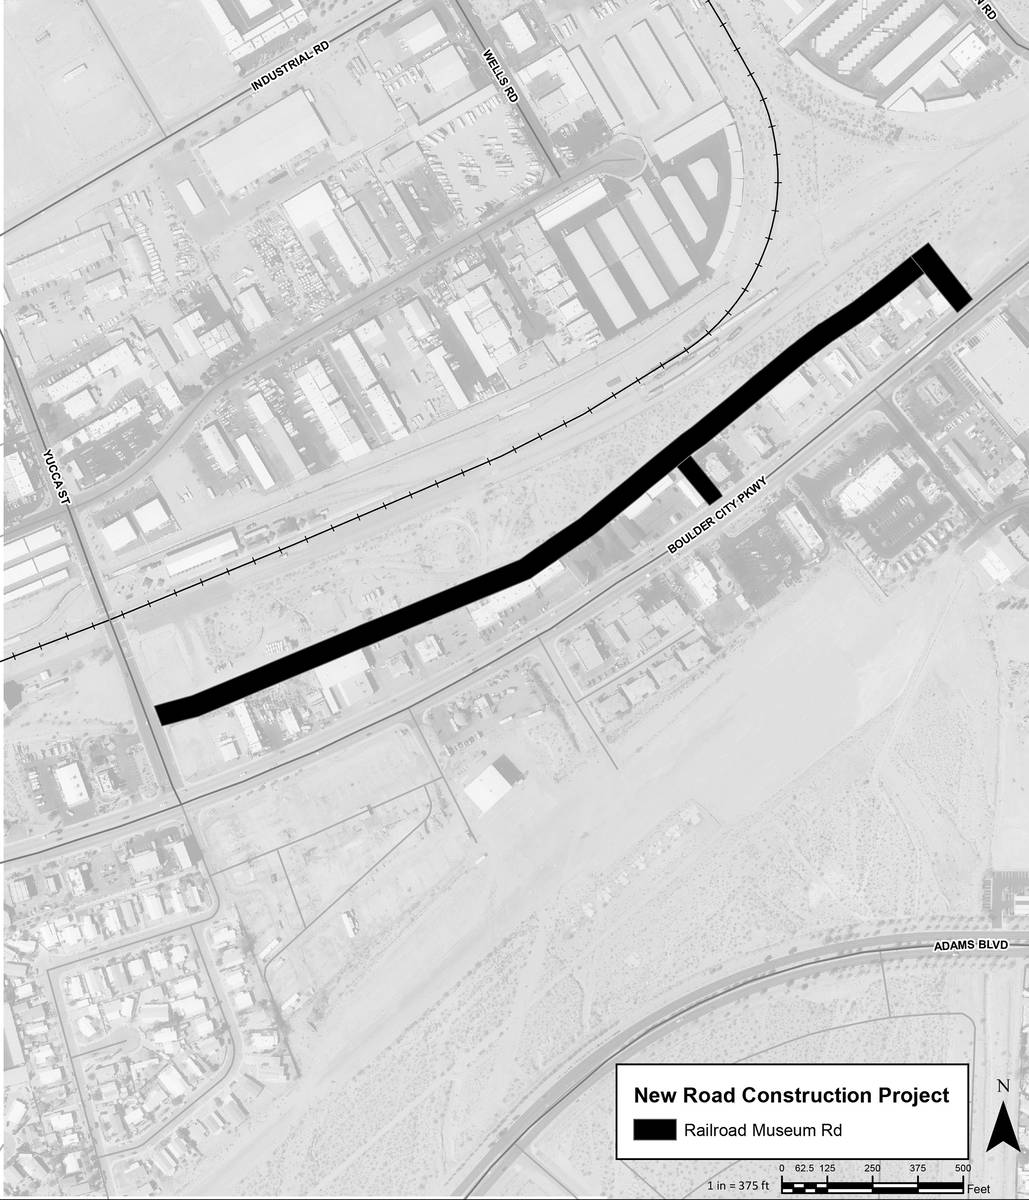 The city is holding a public meeting from 4-5:30 p.m. today about the access road for the propo ...